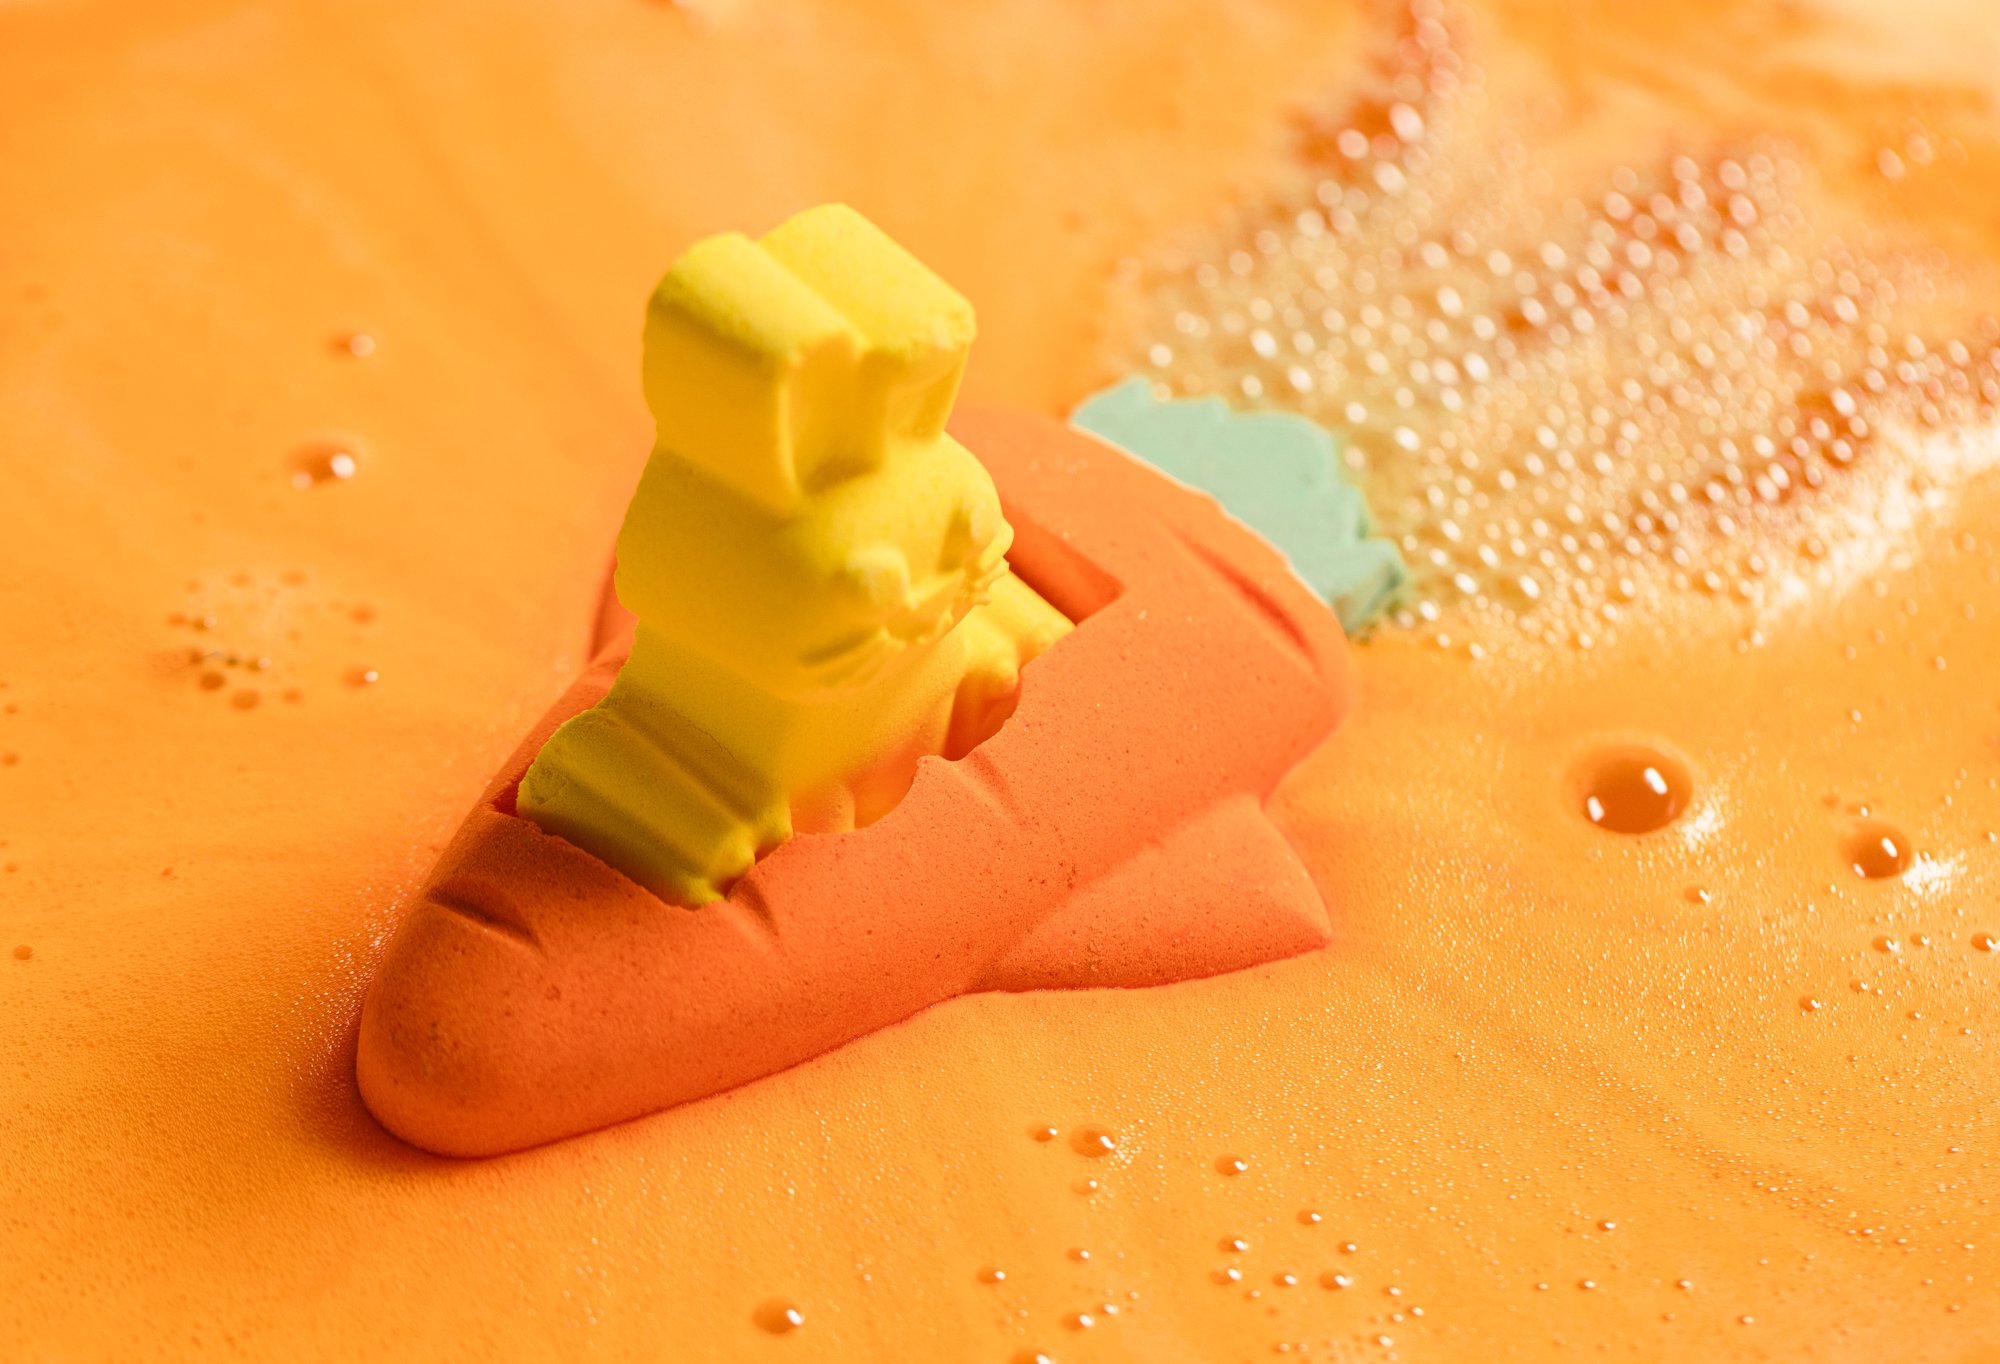 The carrot bath bomb floats in orange foamy water, with bubbles coming out its green end, the bunny bath bomb pilot sits inside.